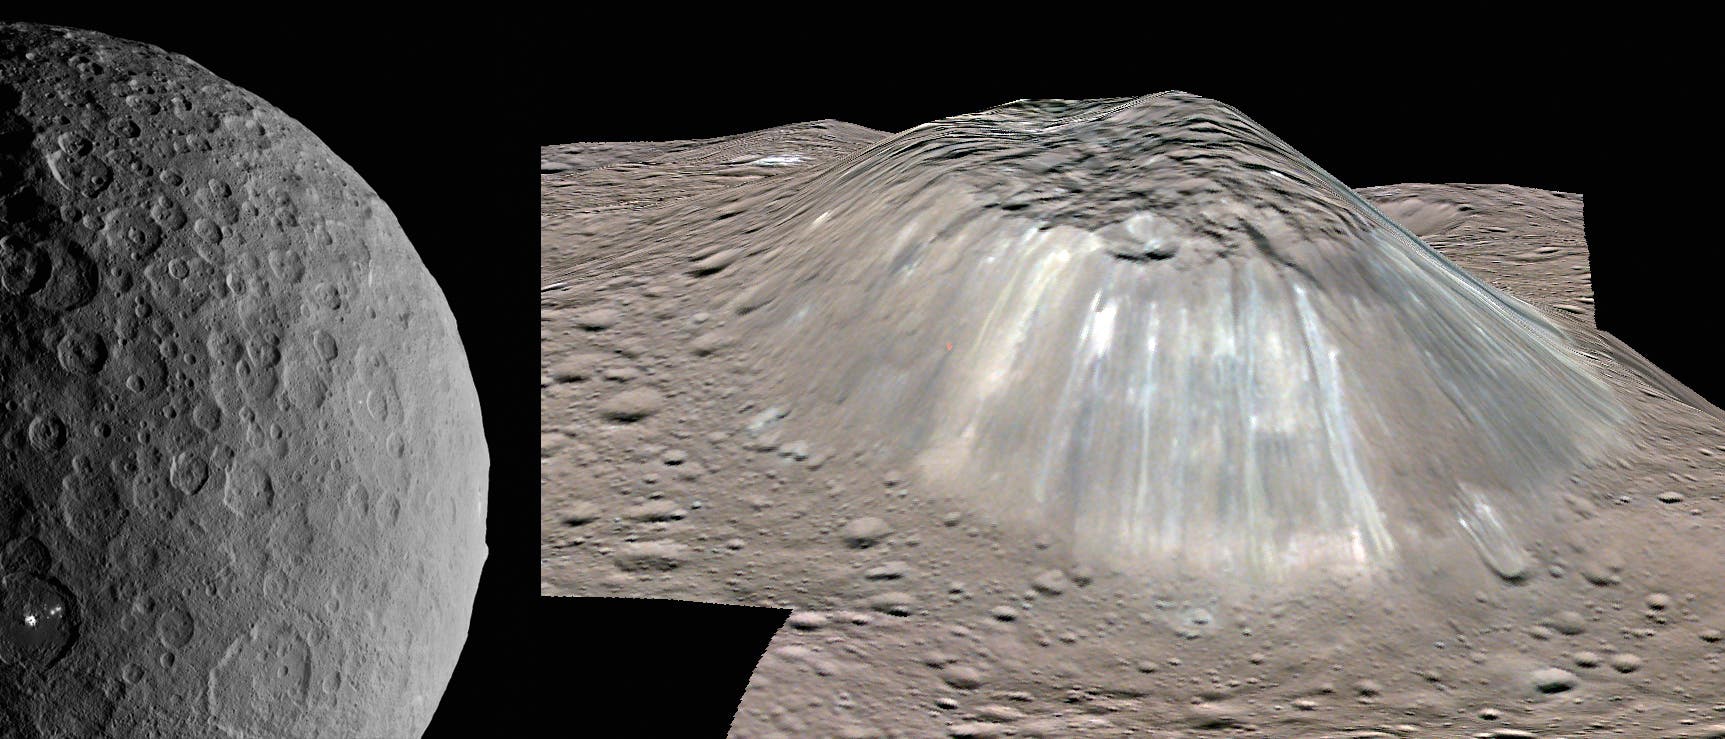 Ceres, Occator, Ahuna Mons